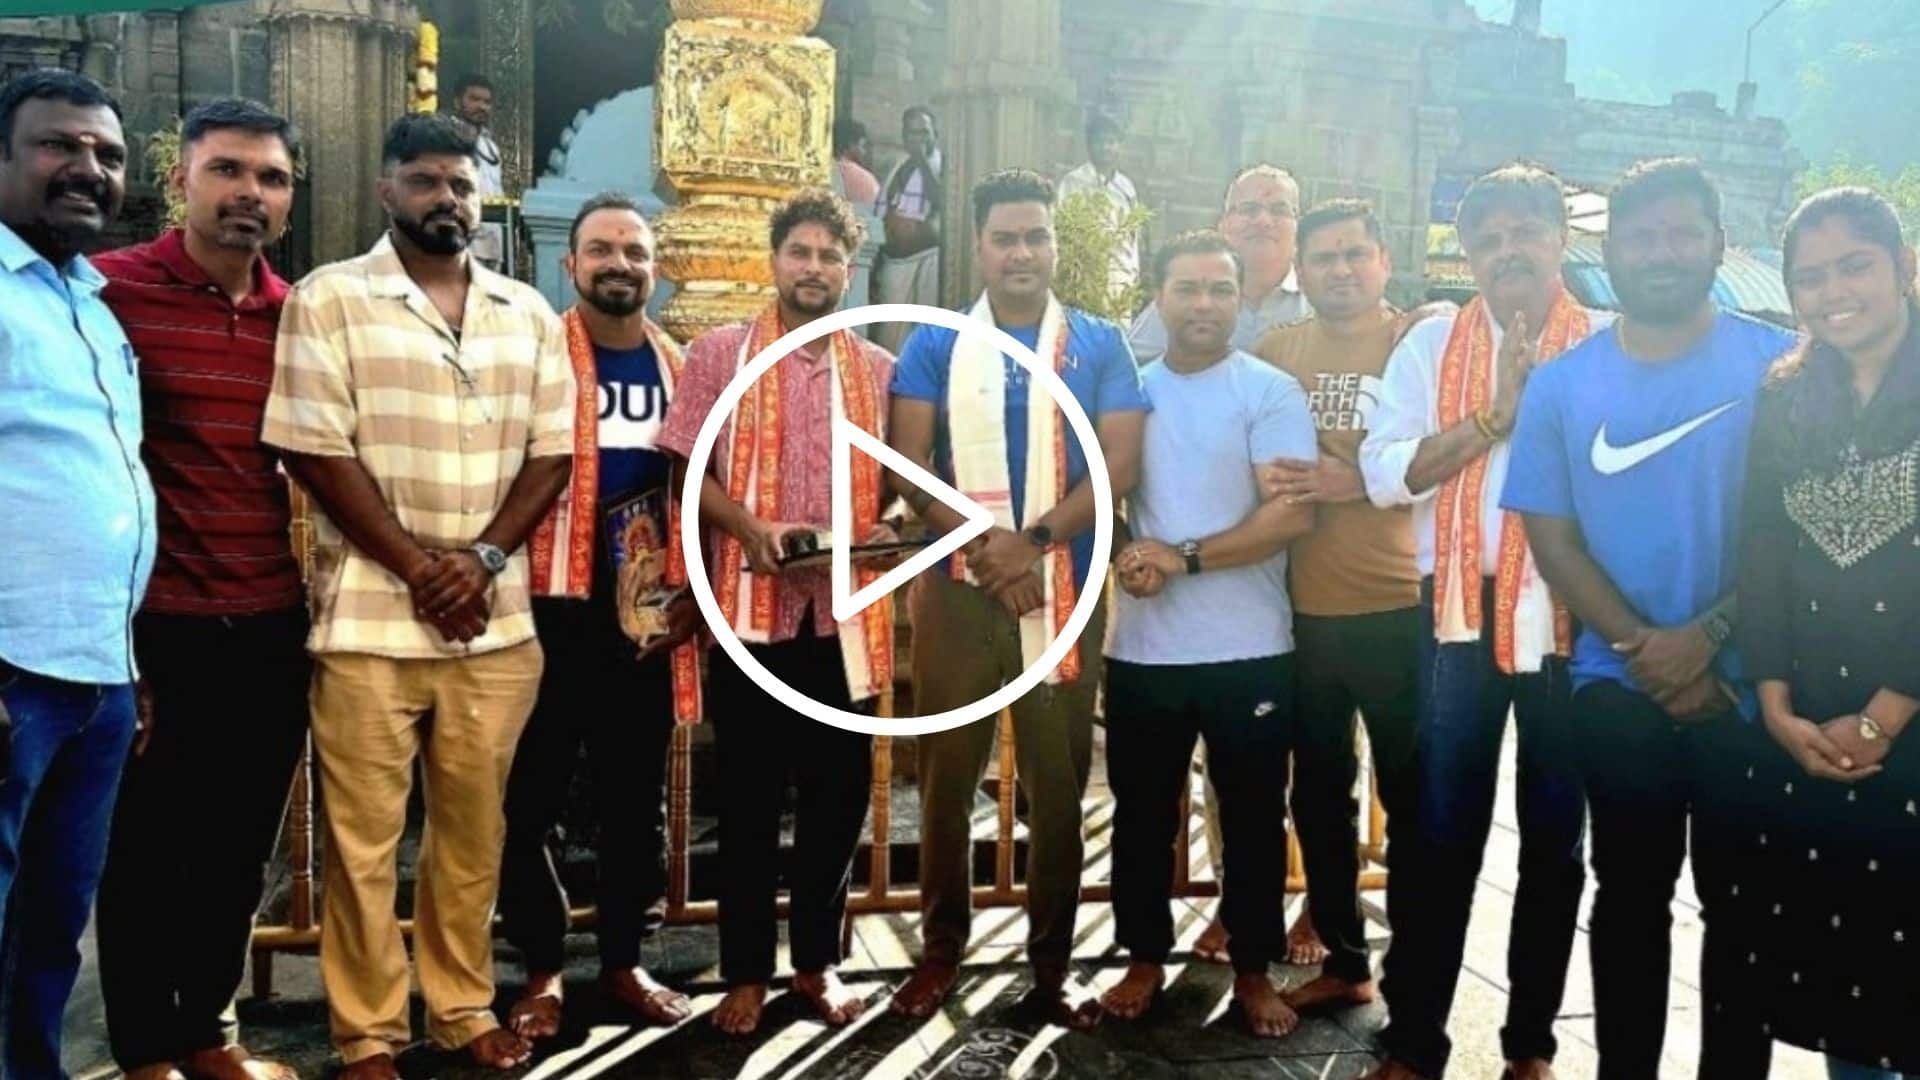 [Watch] Kuldeep Yadav Visits Simhachalam Temple in Vizag Ahead of IND vs ENG 2nd Test